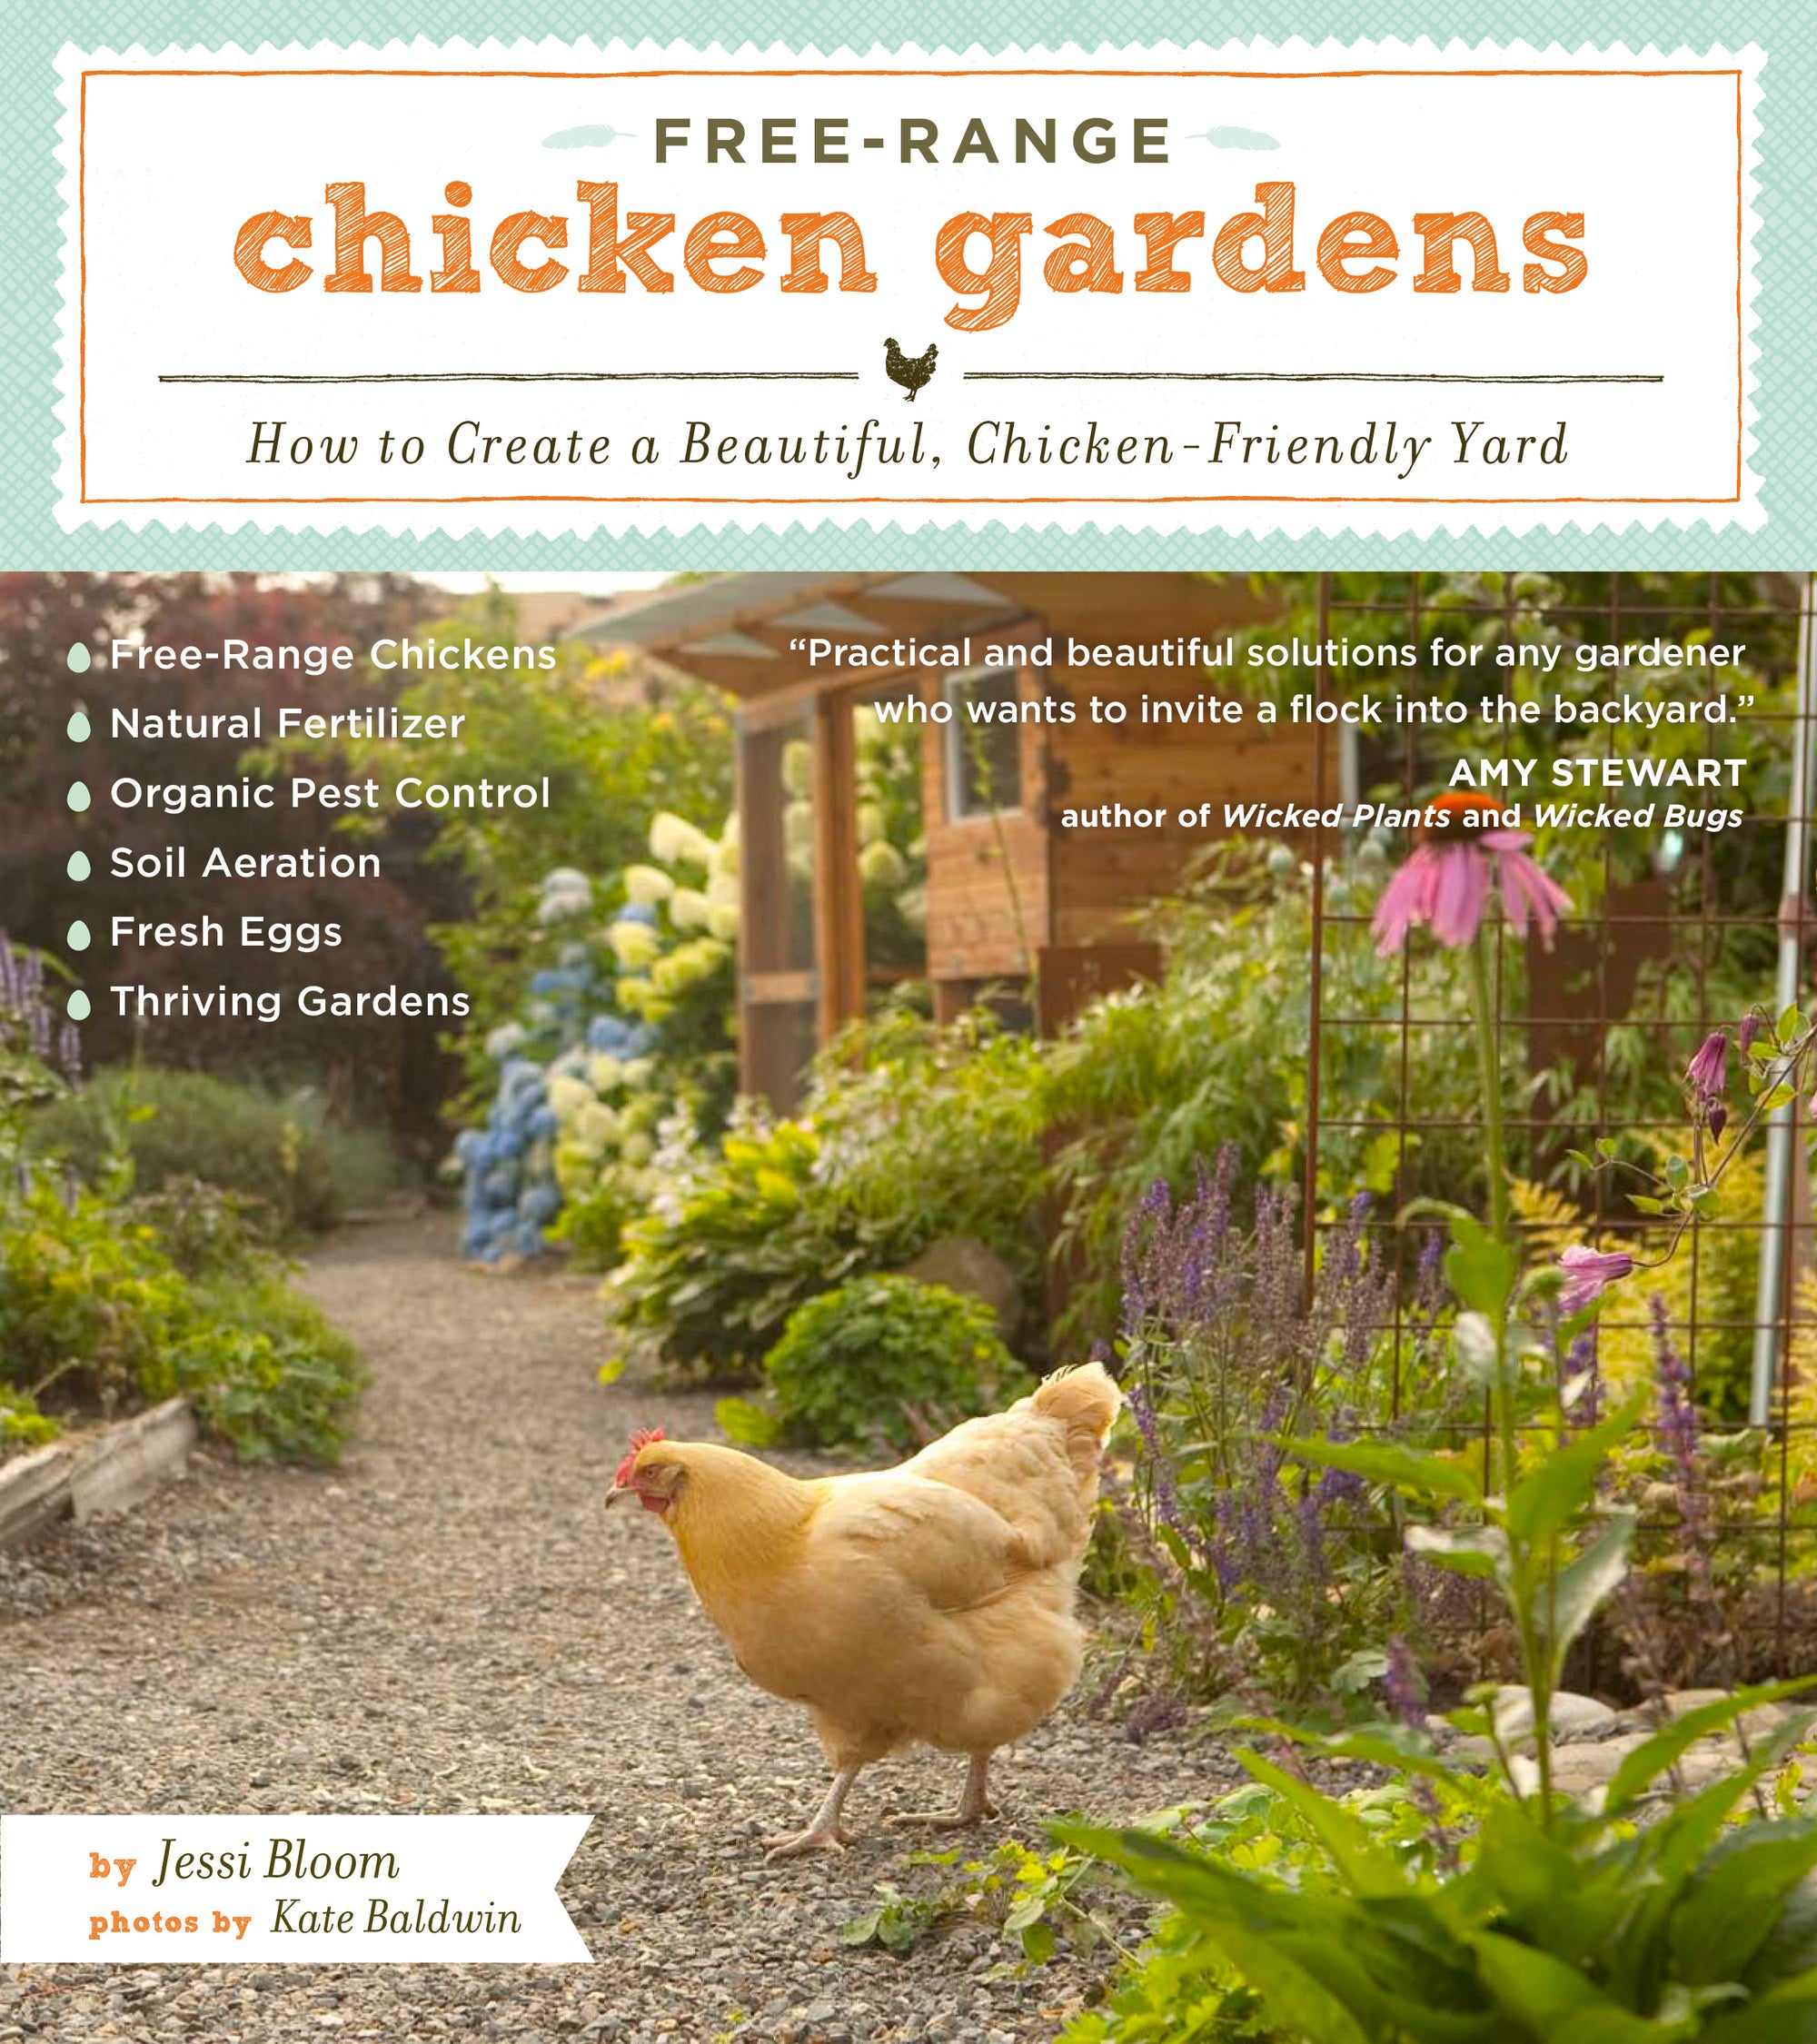 The cover shows a tan colored chicken in the middle of a colorful garden. 